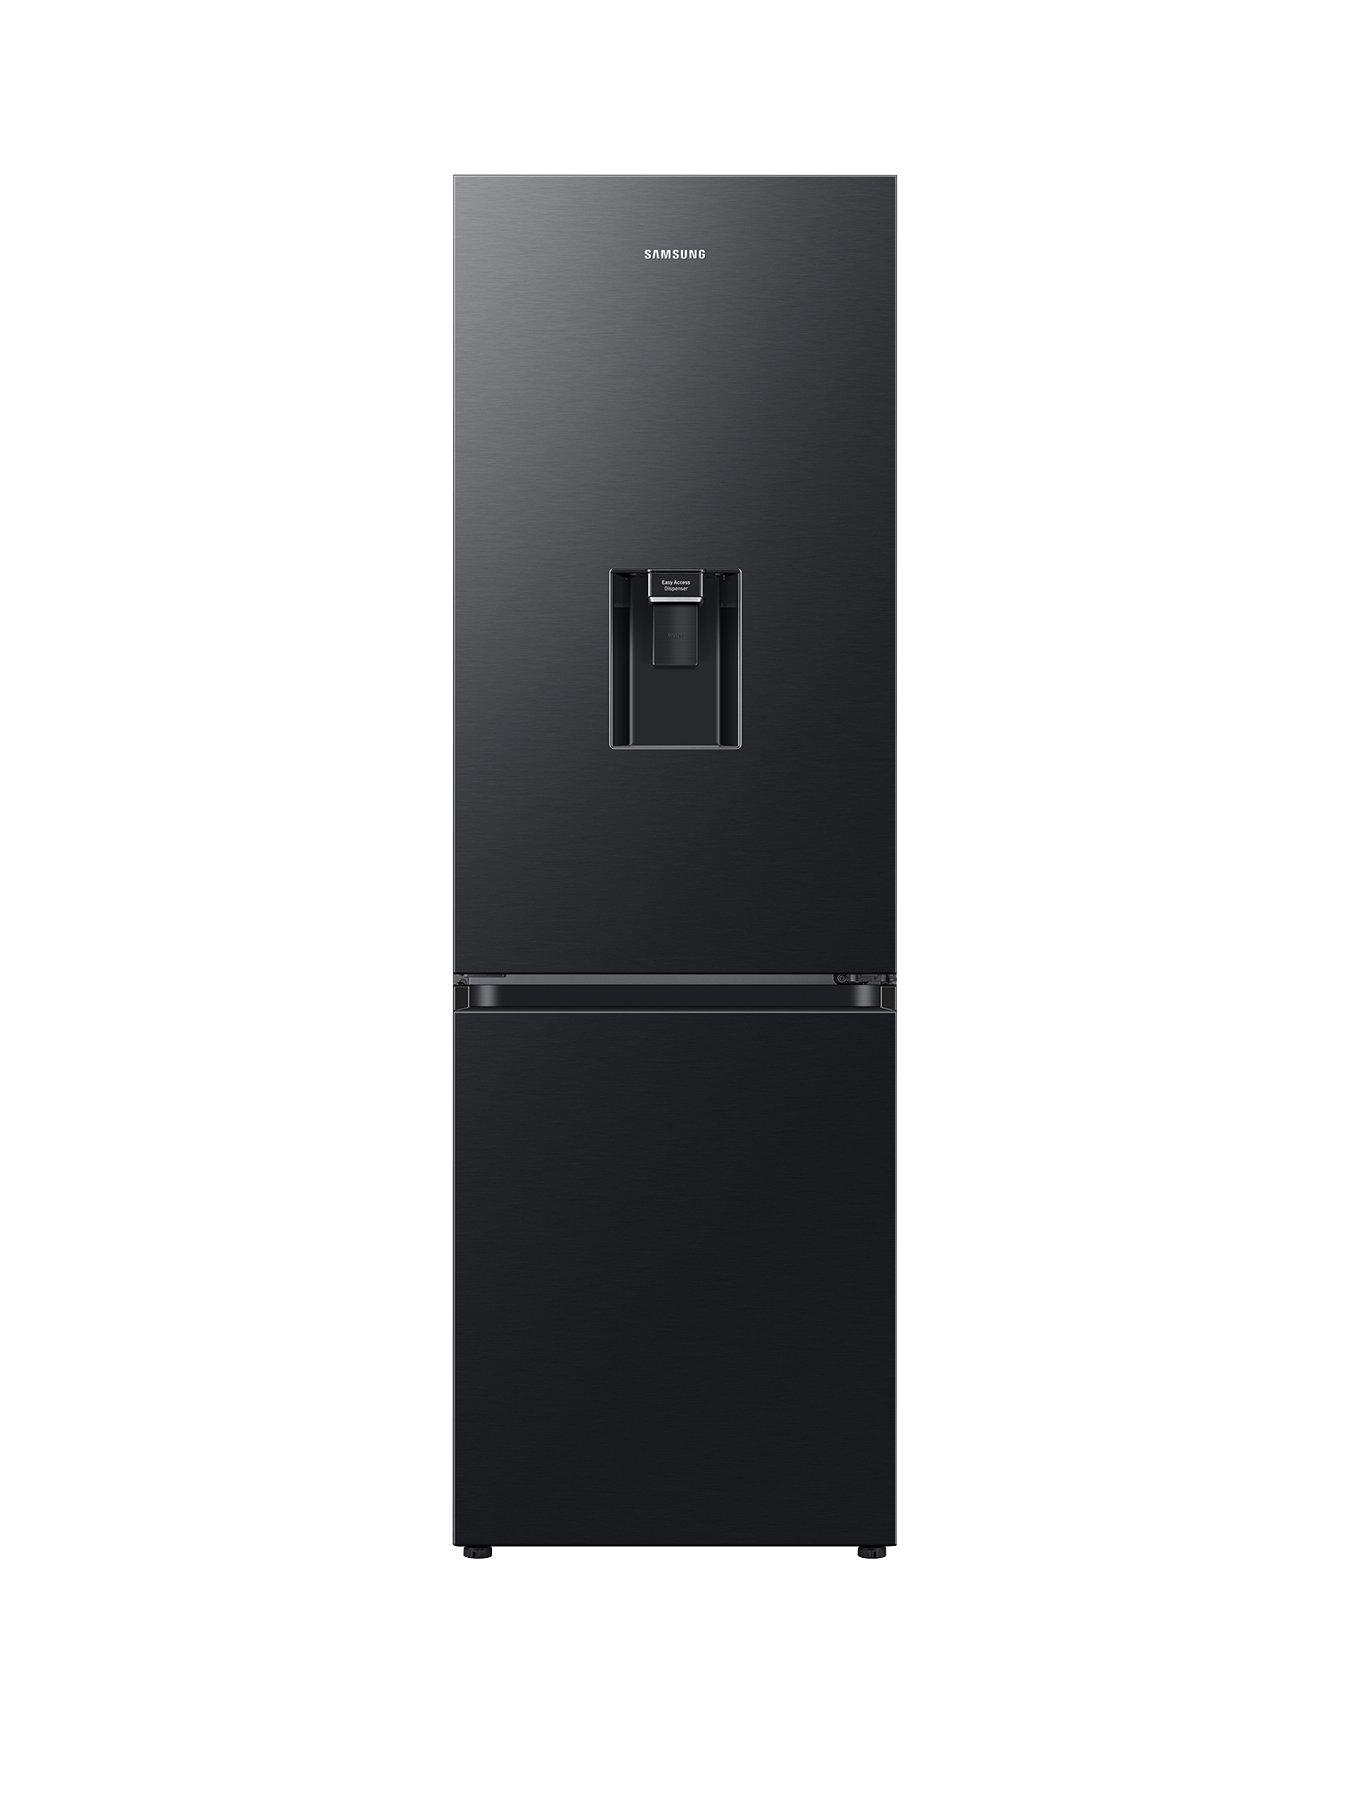 Samsung Rb7300T Rb34C632Ebn/Eu Classic Fridge Freezer With Non Plumbed Water Dispenser - E Rated - Black